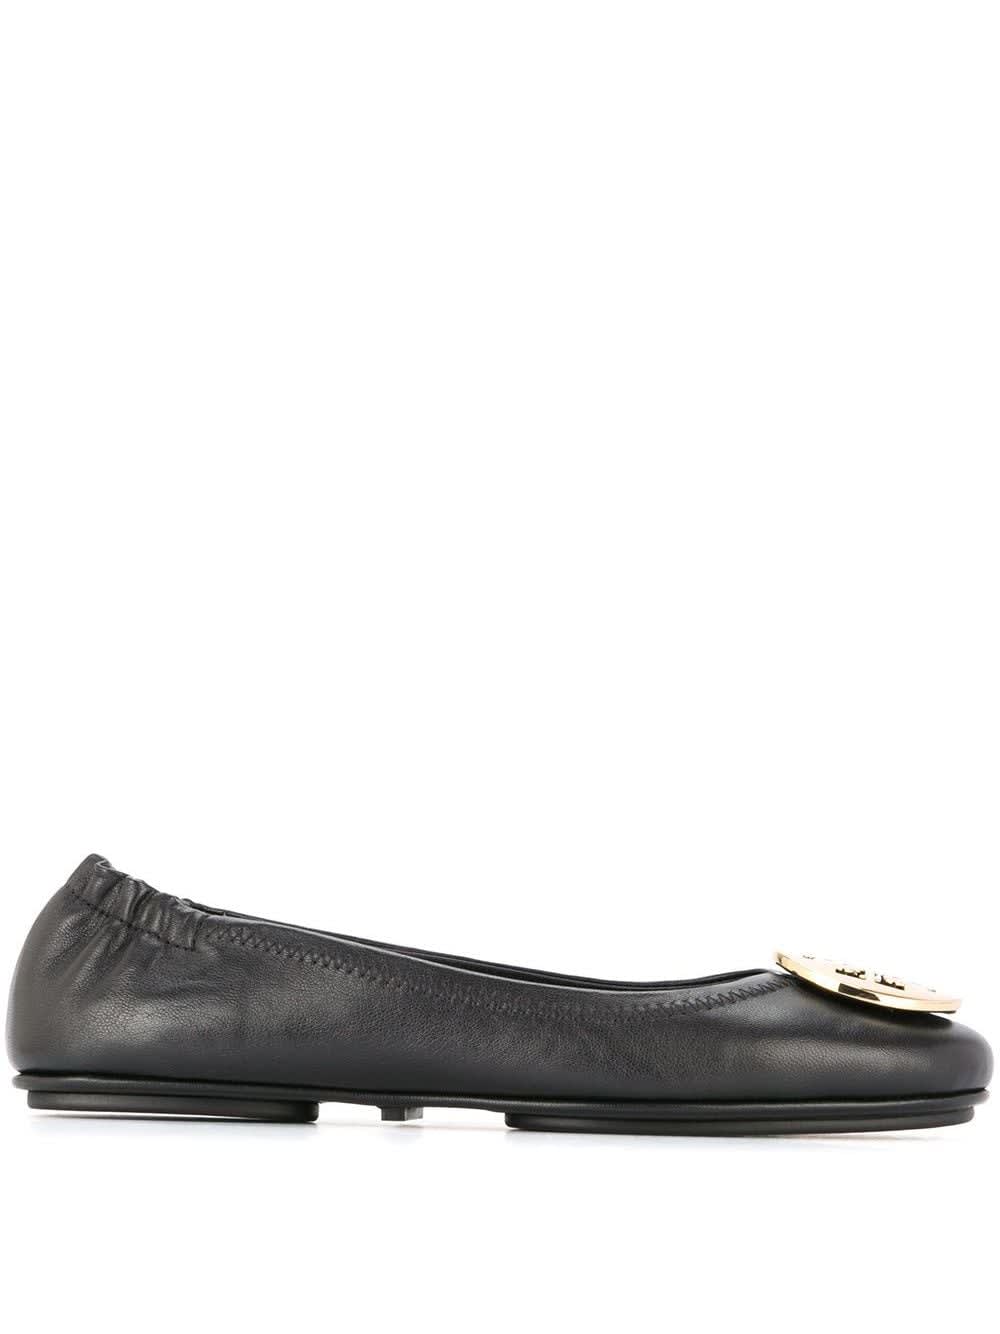 Shop Tory Burch Minnie Flat Shoes In Black Leather With Logo